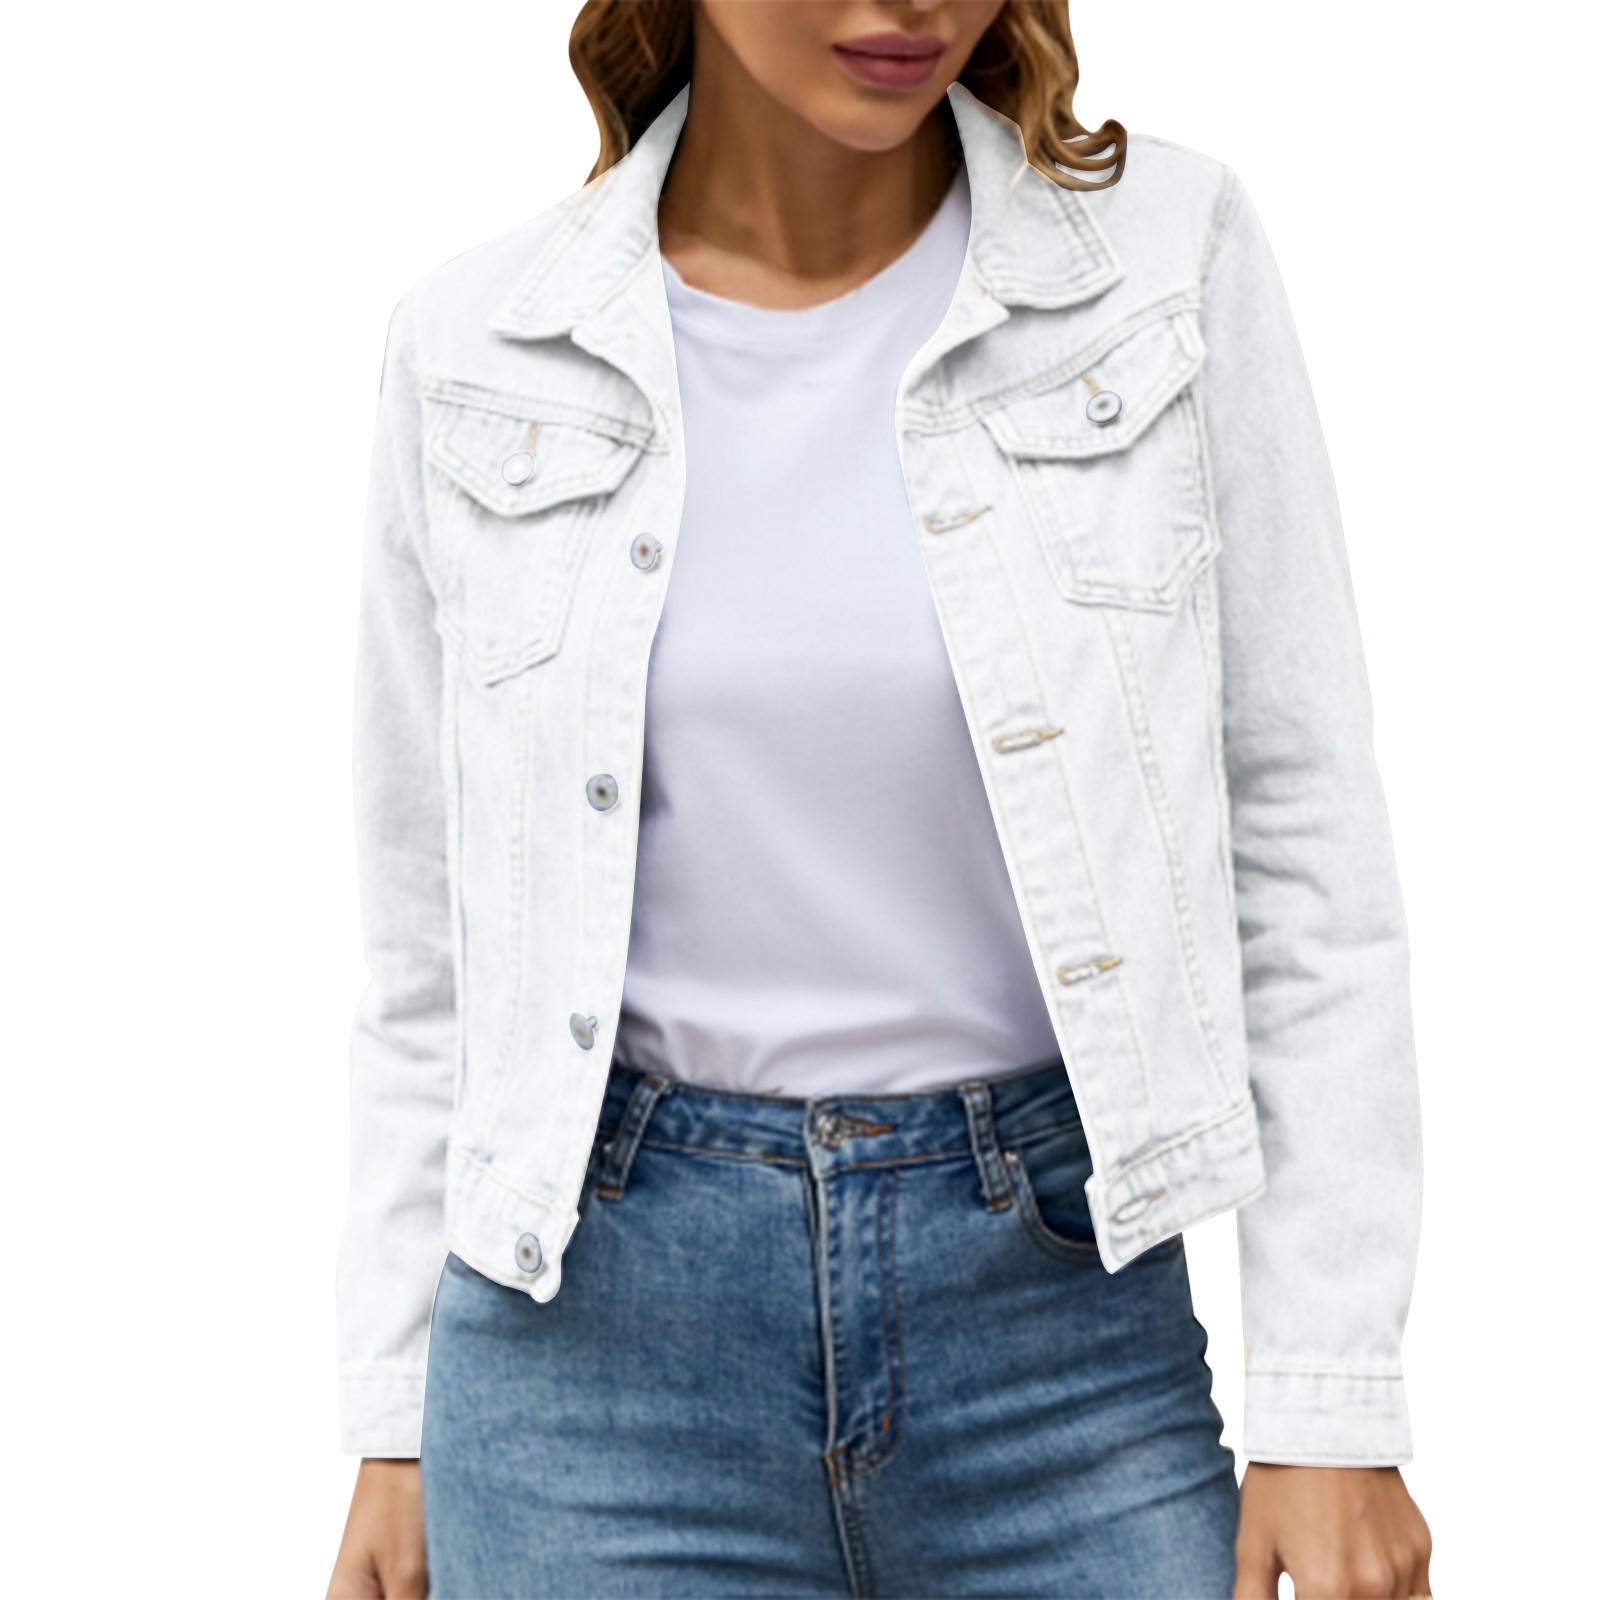 iOPQO womens sweaters Women's Basic Solid Color Button Down Denim Cotton Jacket With Pockets Denim Jacket Coat Women's Denim Jackets White L - image 3 of 8